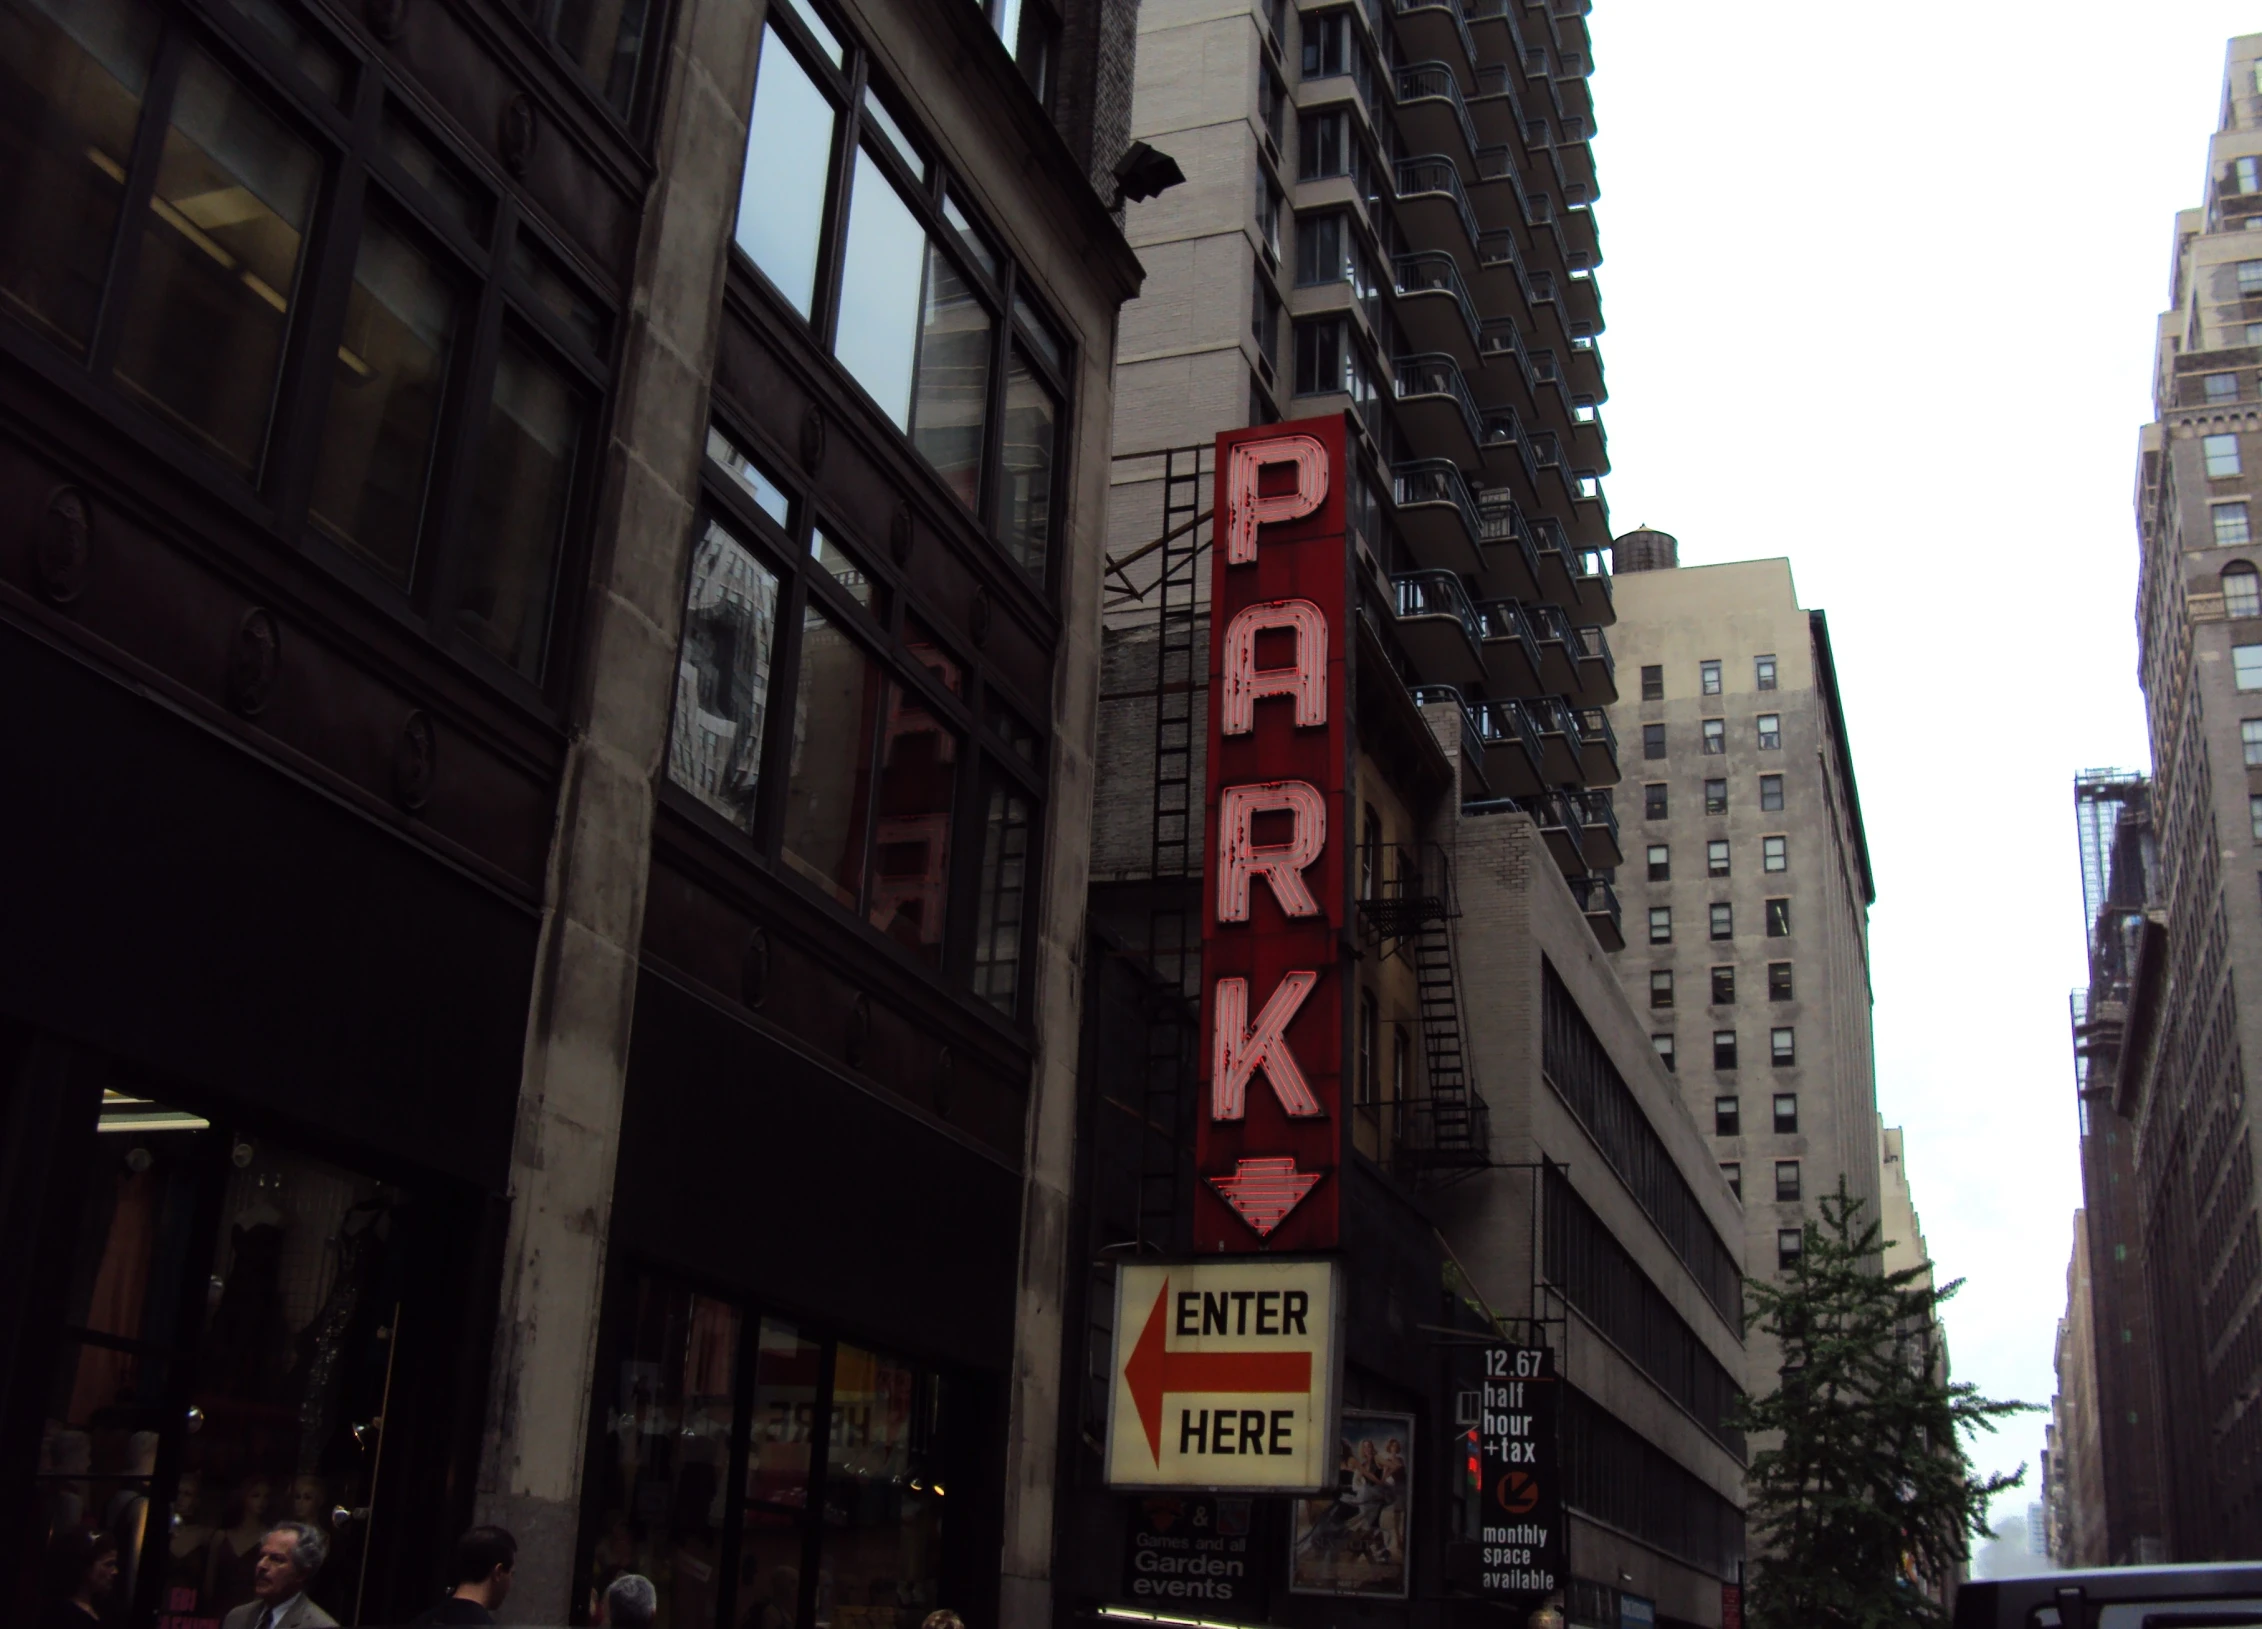 the park theater sign hangs over the sidewalk in the city